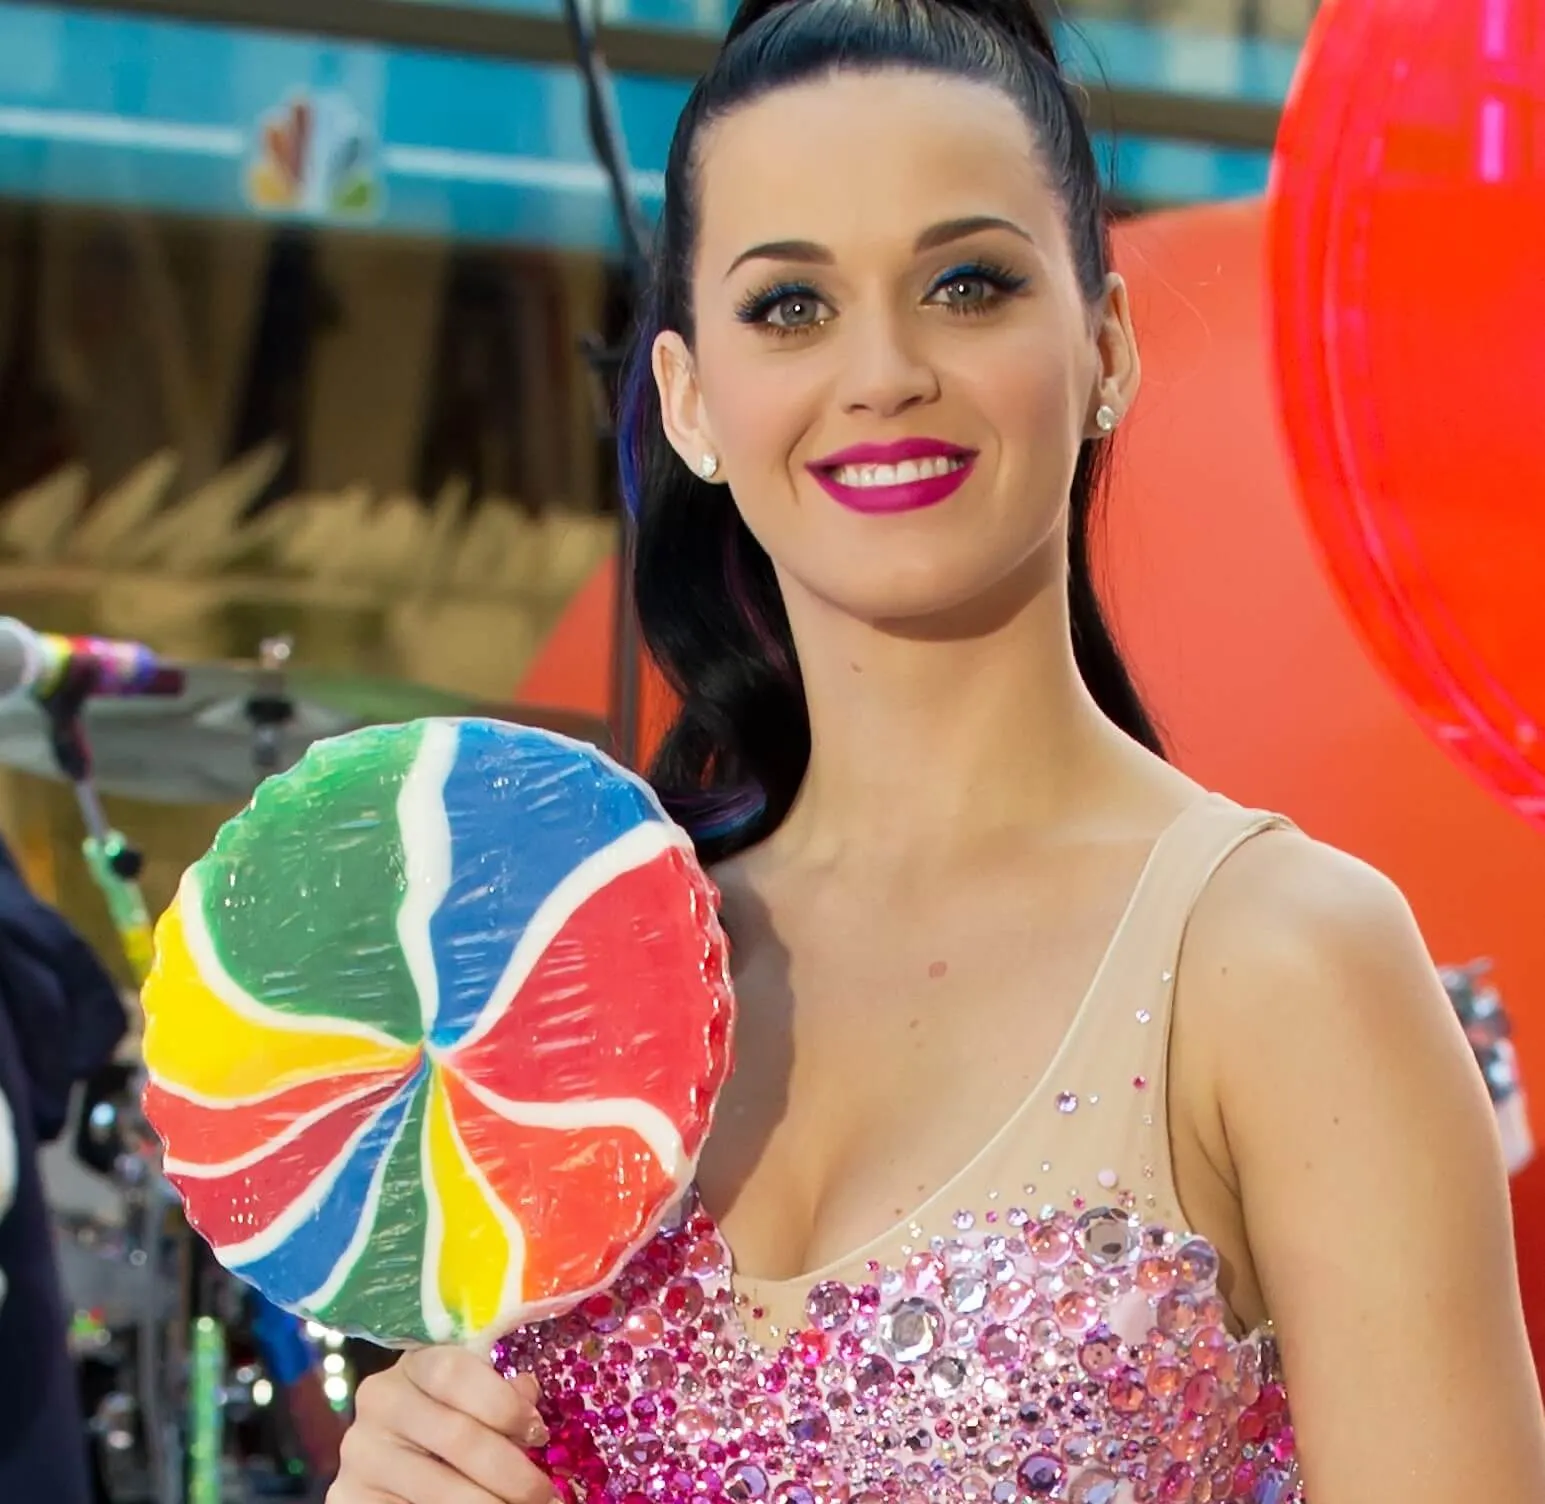 "Teenage Dream" star Katy Perry with a microphone